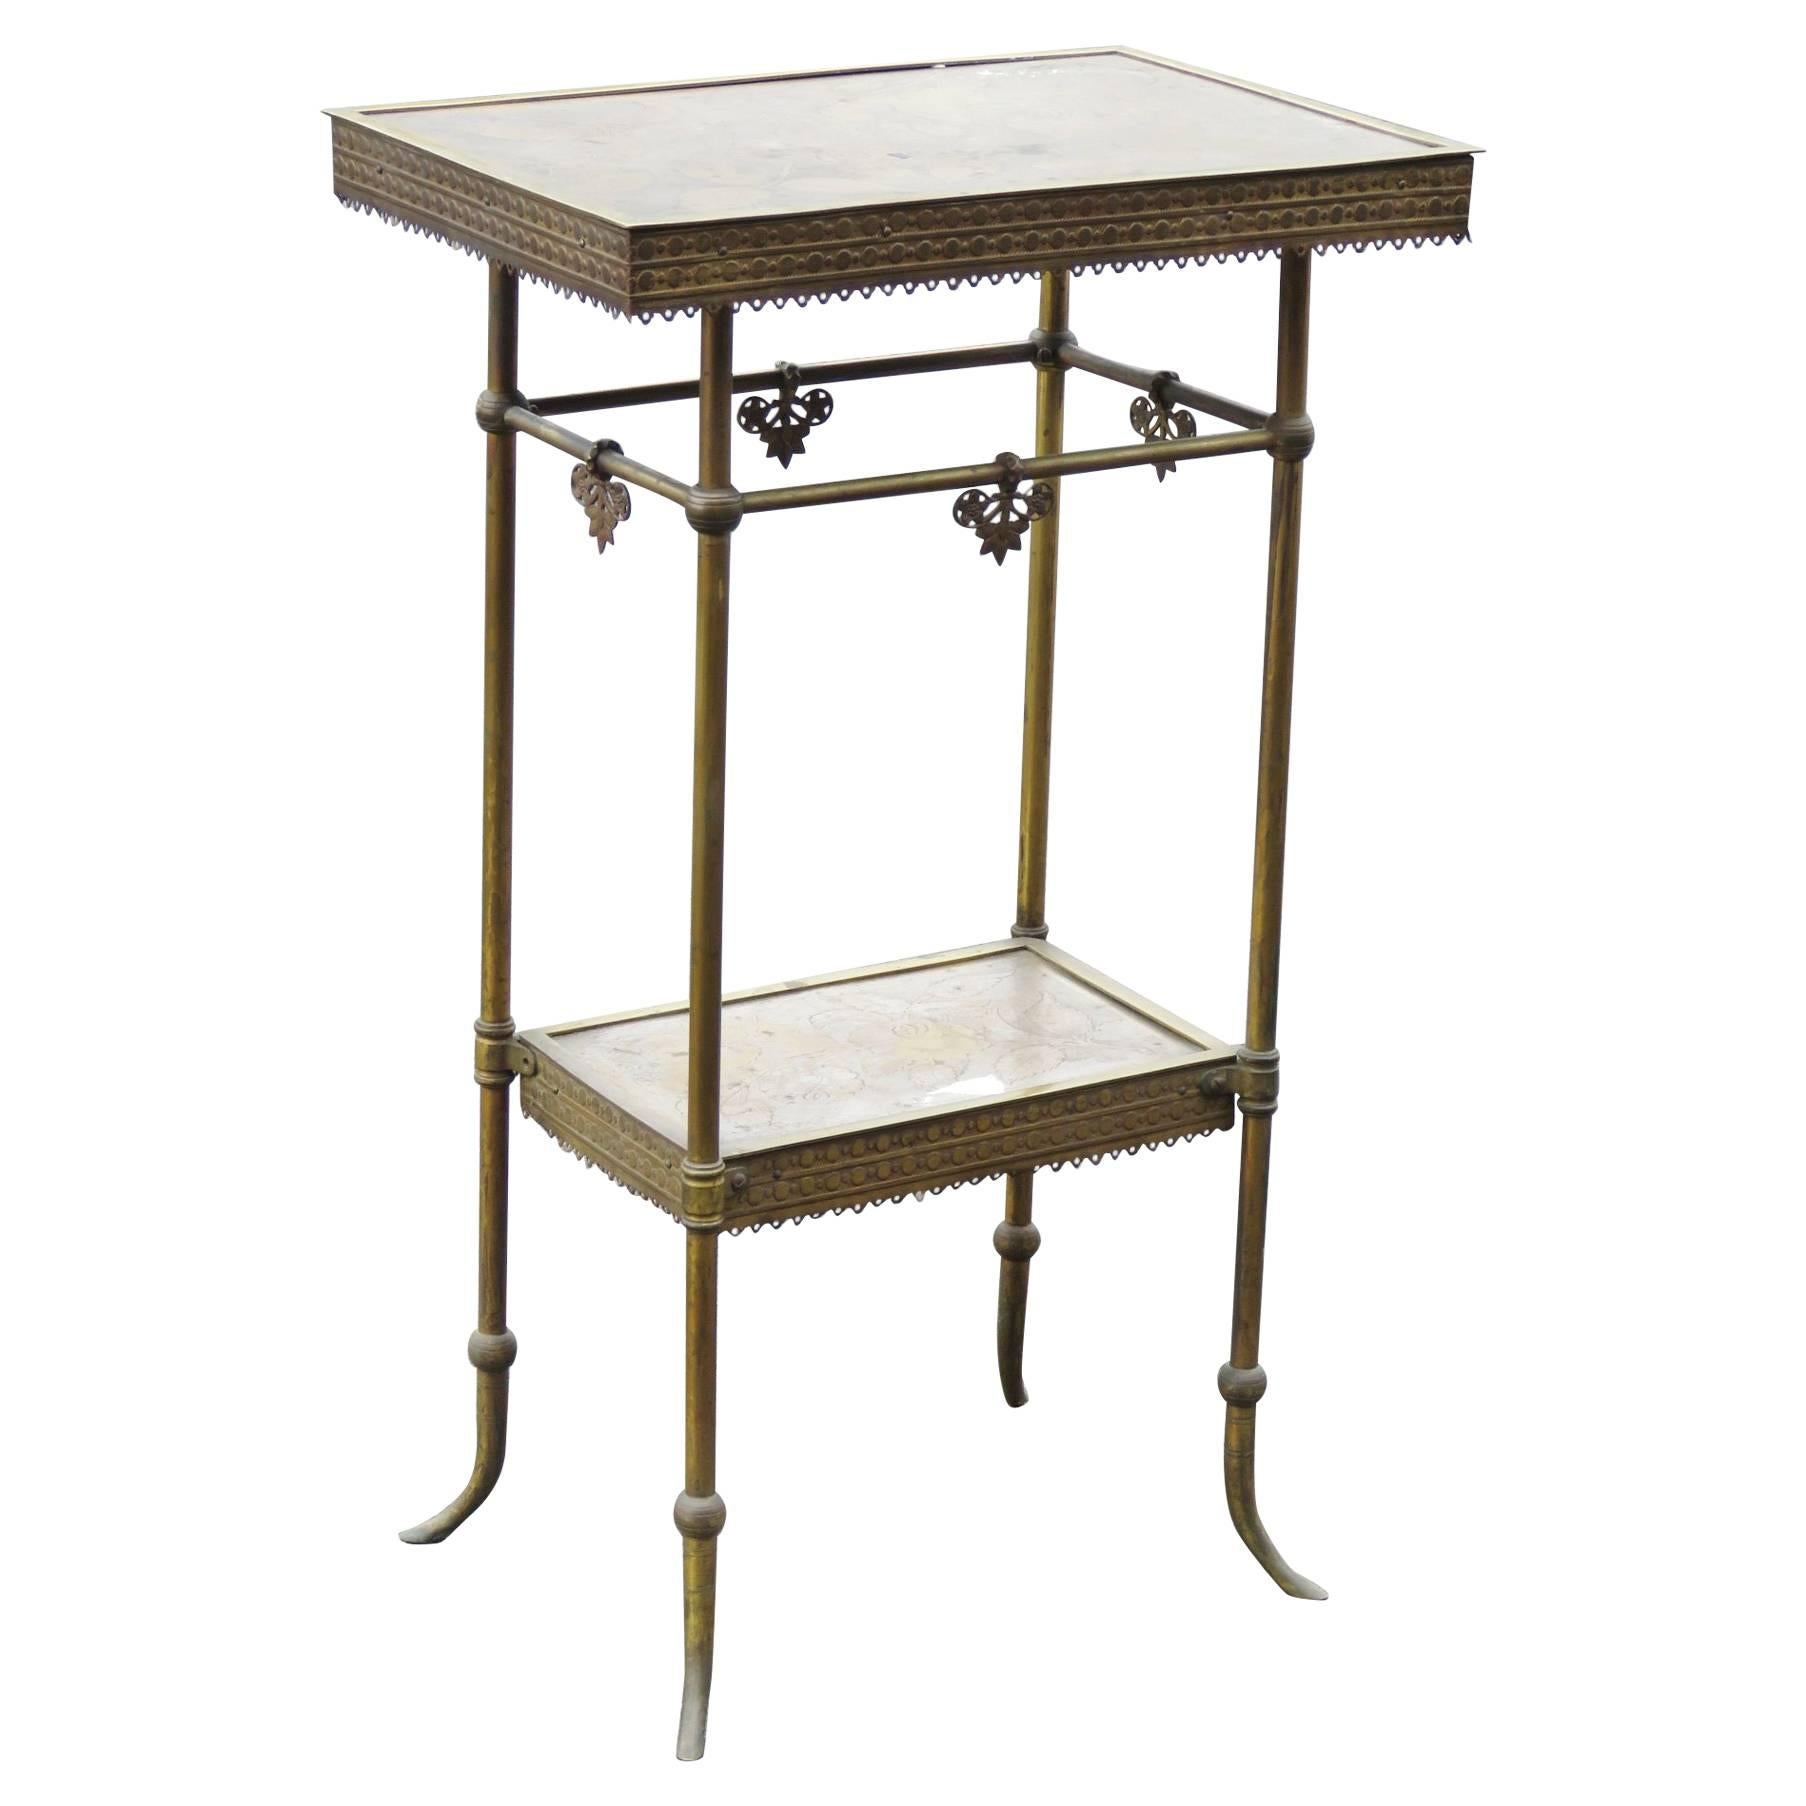 Aesthetic Victorian Decorative Metal Side Table